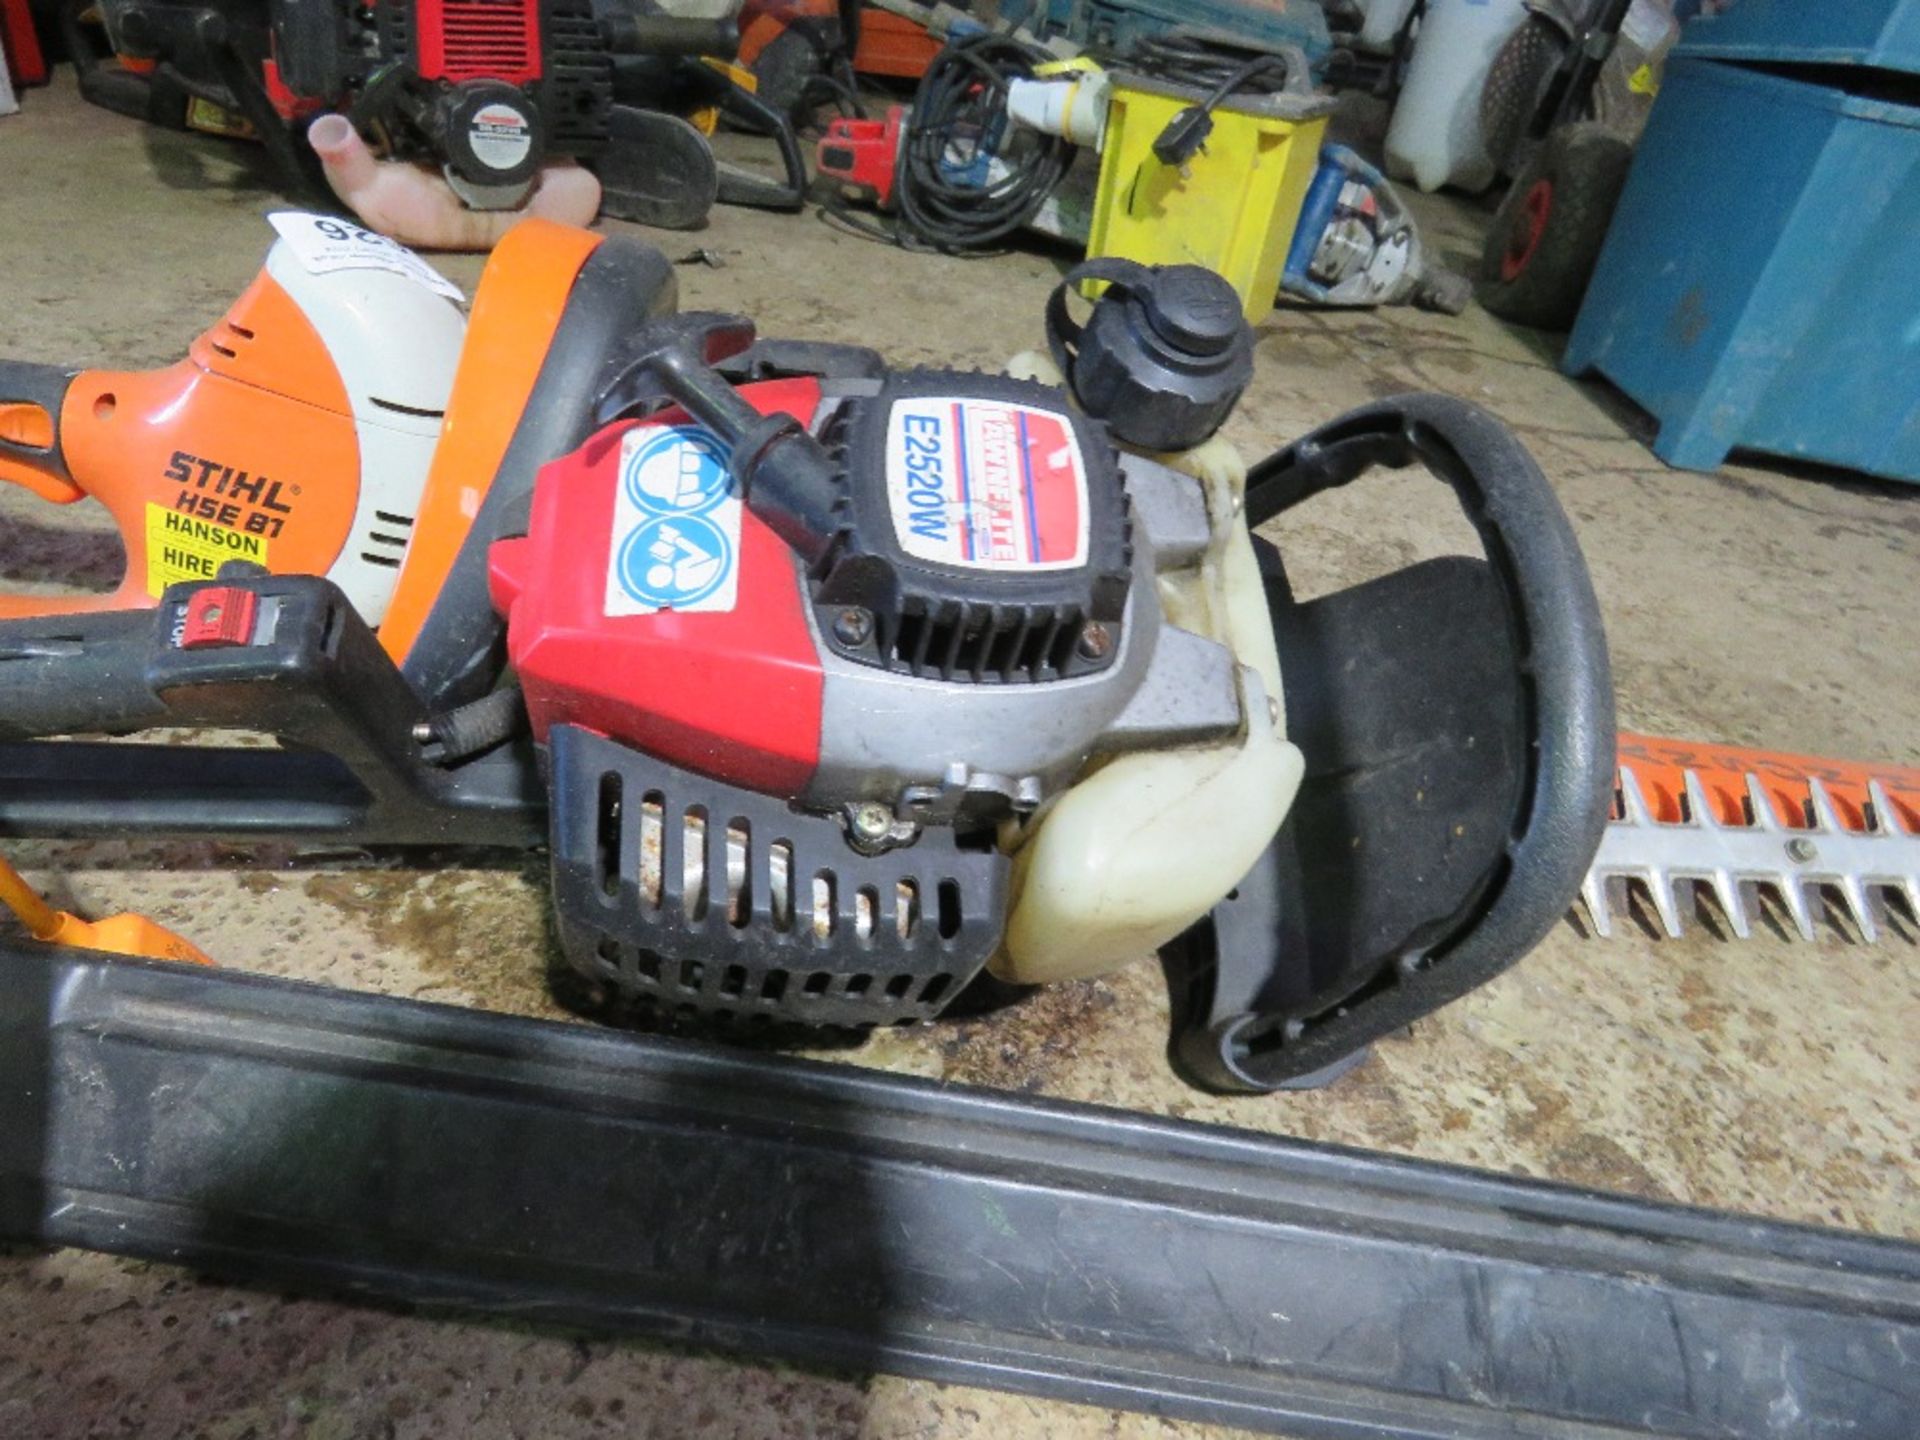 STIHL ELECTRIC HEDGE CUTTER PLUS 2 OTHERS. THIS LOT IS SOLD UNDER THE AUCTIONEERS MARGIN SCHEME, - Image 3 of 5